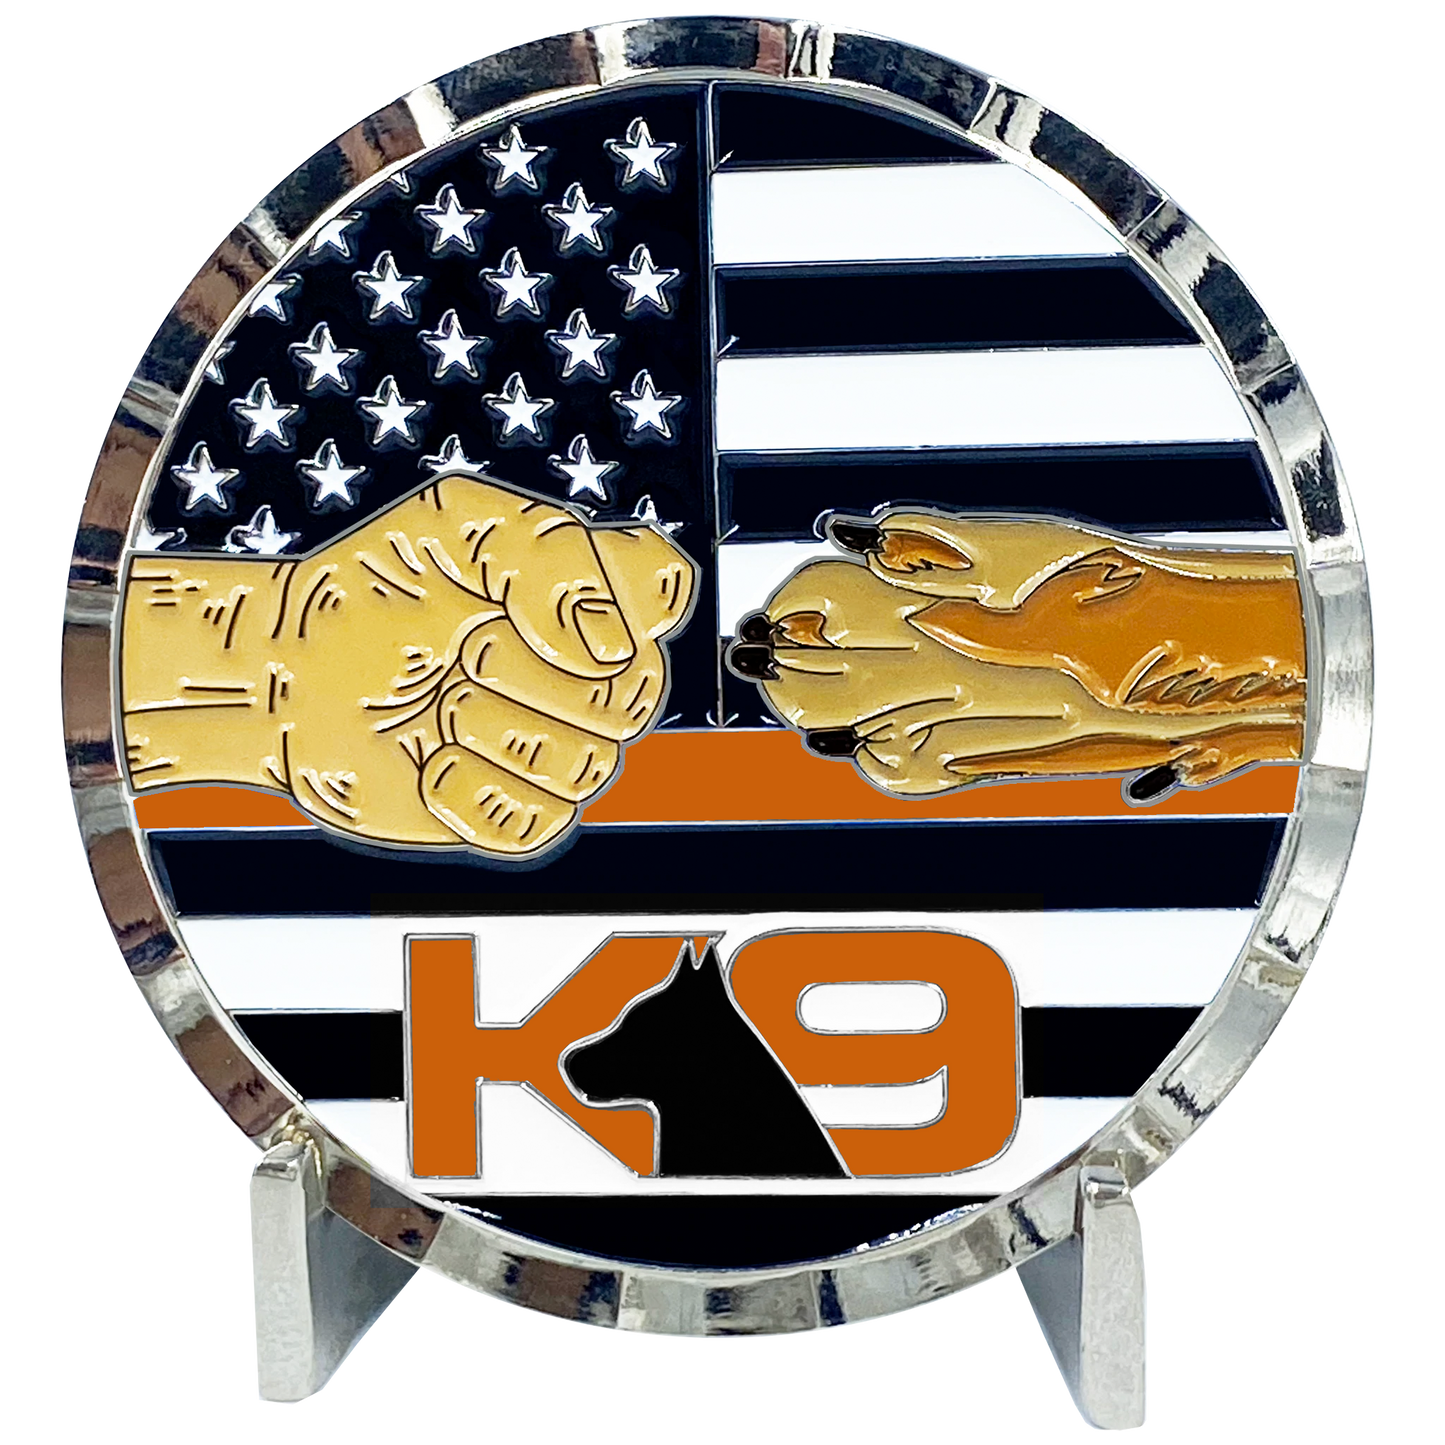 GL3-018 K9 Police Thin Orange Line Canine Challenge Coin Search and Rescue, EMT, EMS, Paramedic Coast Guard